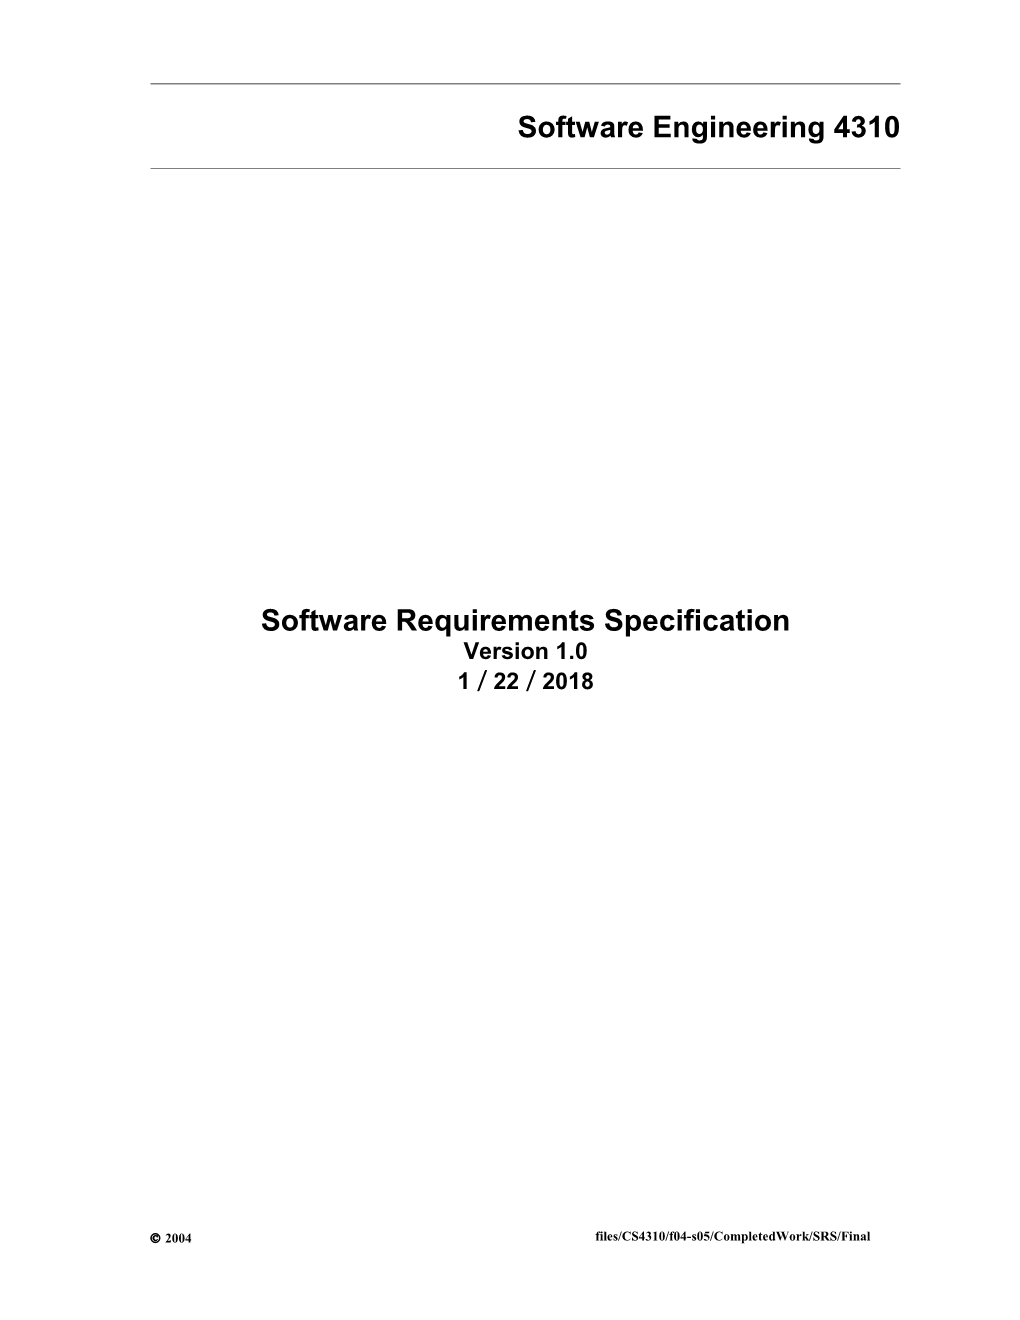 Software Requirements Specification s3